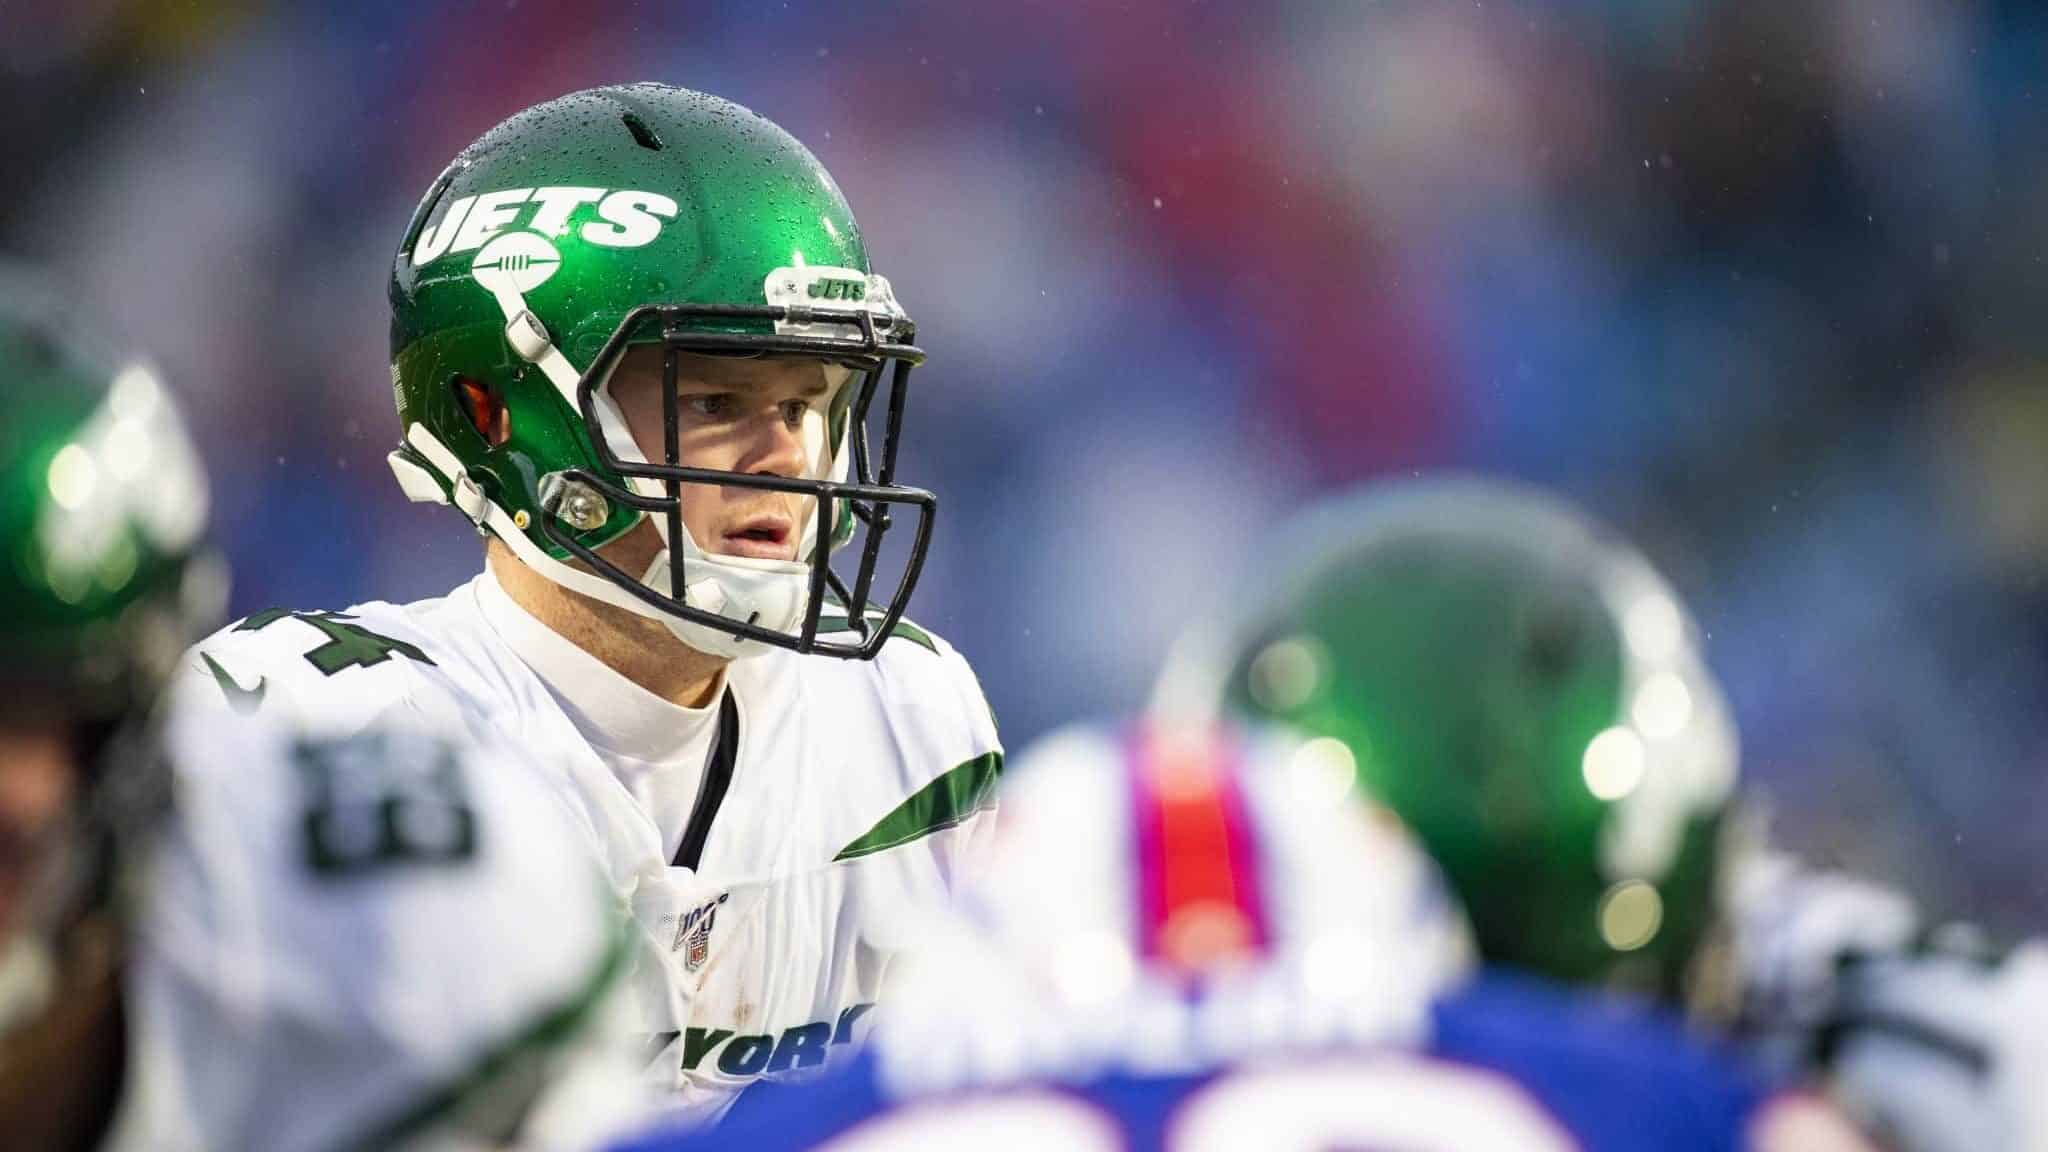 ORCHARD PARK, NY - DECEMBER 29: Sam Darnold #14 of the New York Jets moves behind the line of scrimmage during the fourth quarter against the Buffalo Bills at New Era Field on December 29, 2019 in Orchard Park, New York.